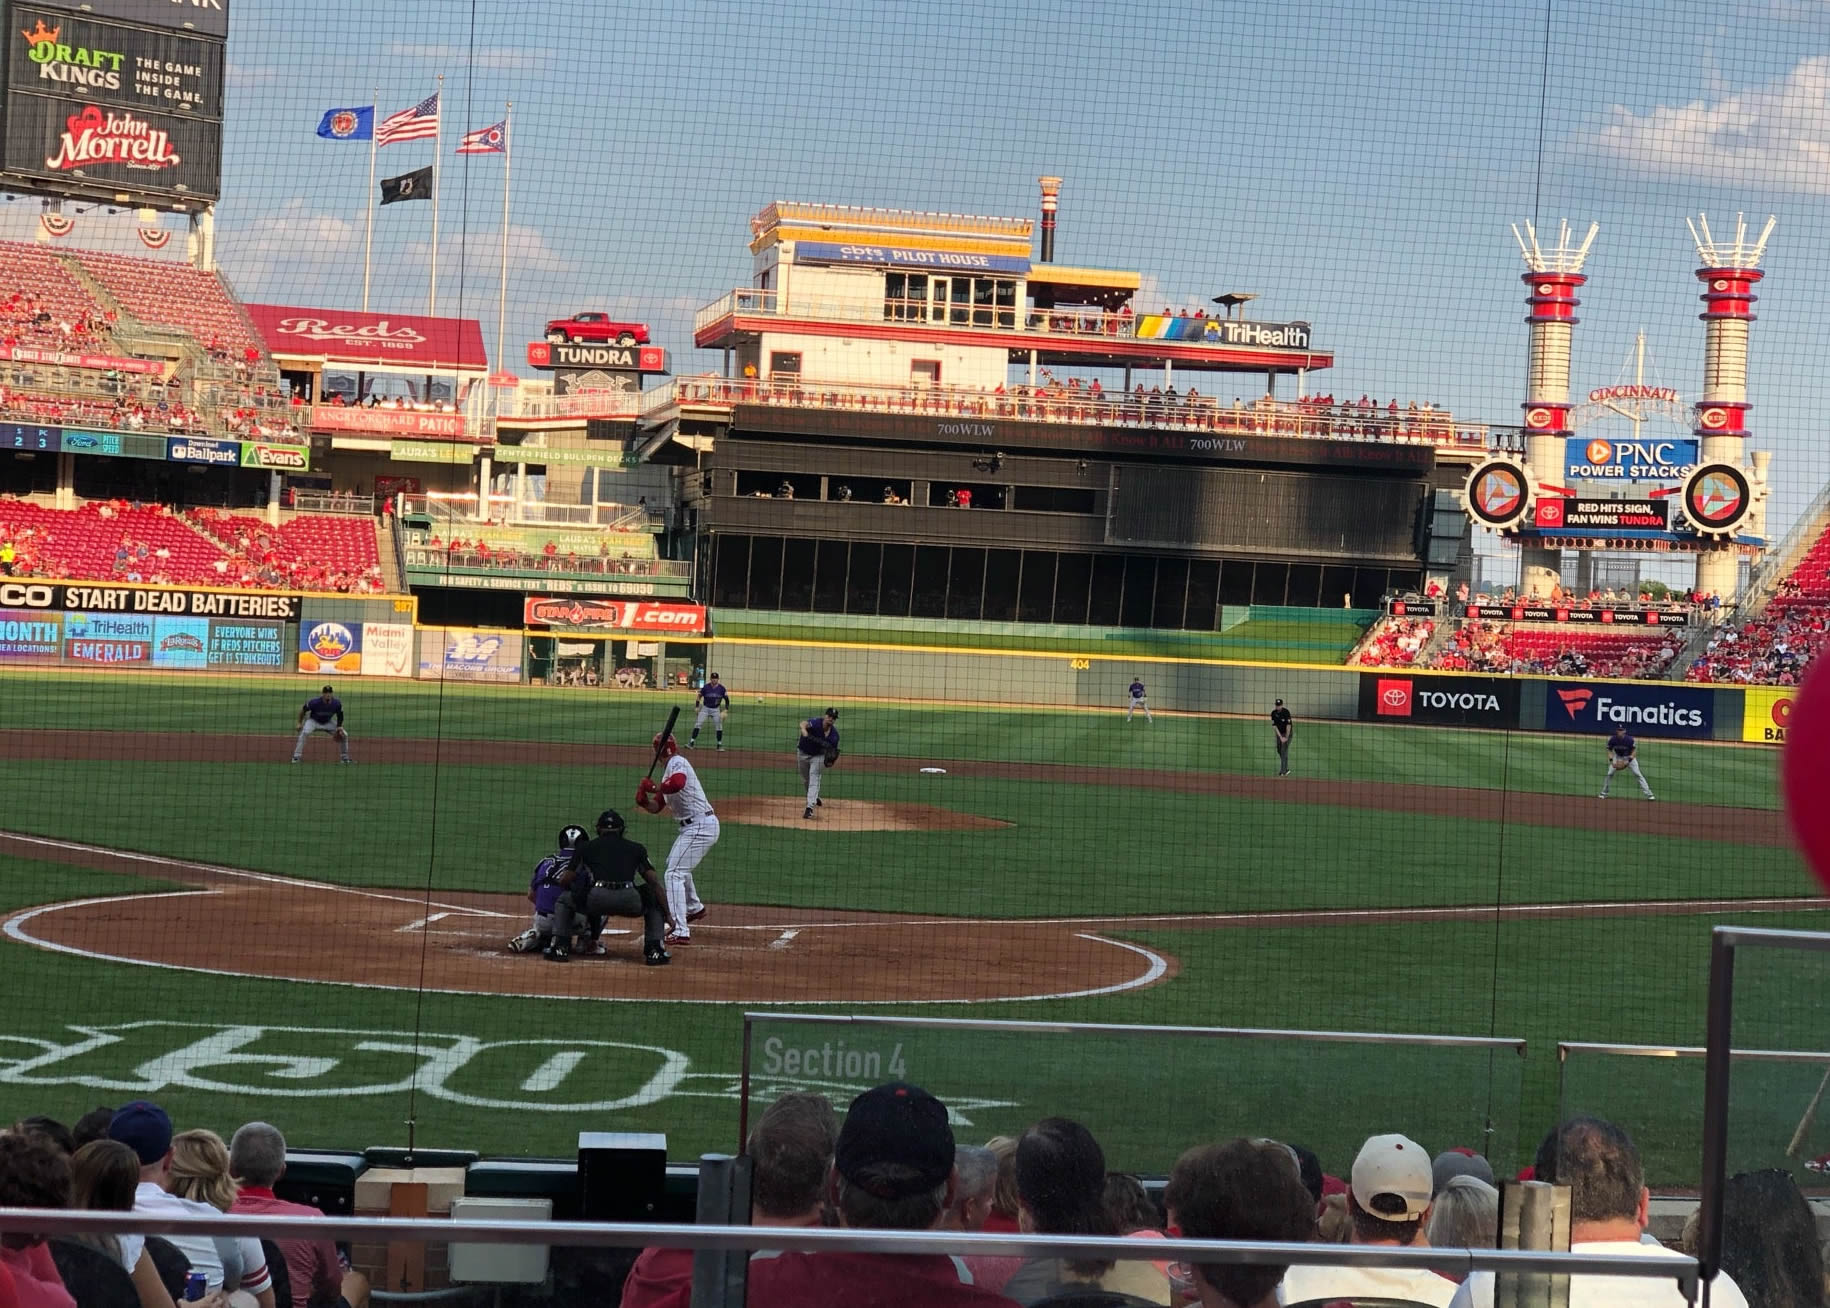 section 24 seat view  for baseball - great american ball park